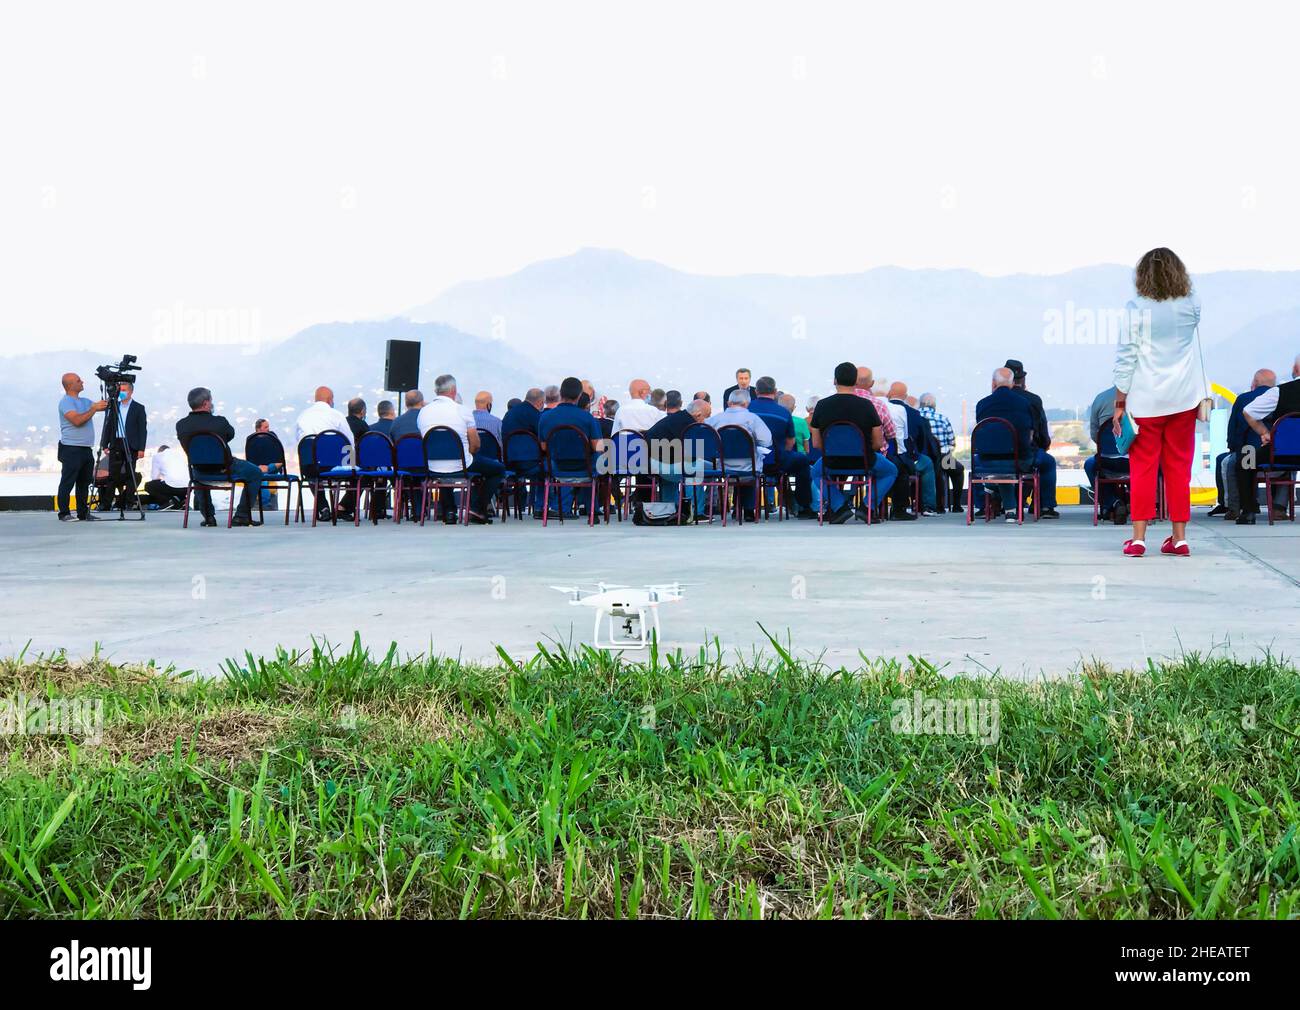 17th of october, Batumi, Georgia. Group of people sitting on the chairs outside in public event with a drone standing in the foreground. Political agi Stock Photo